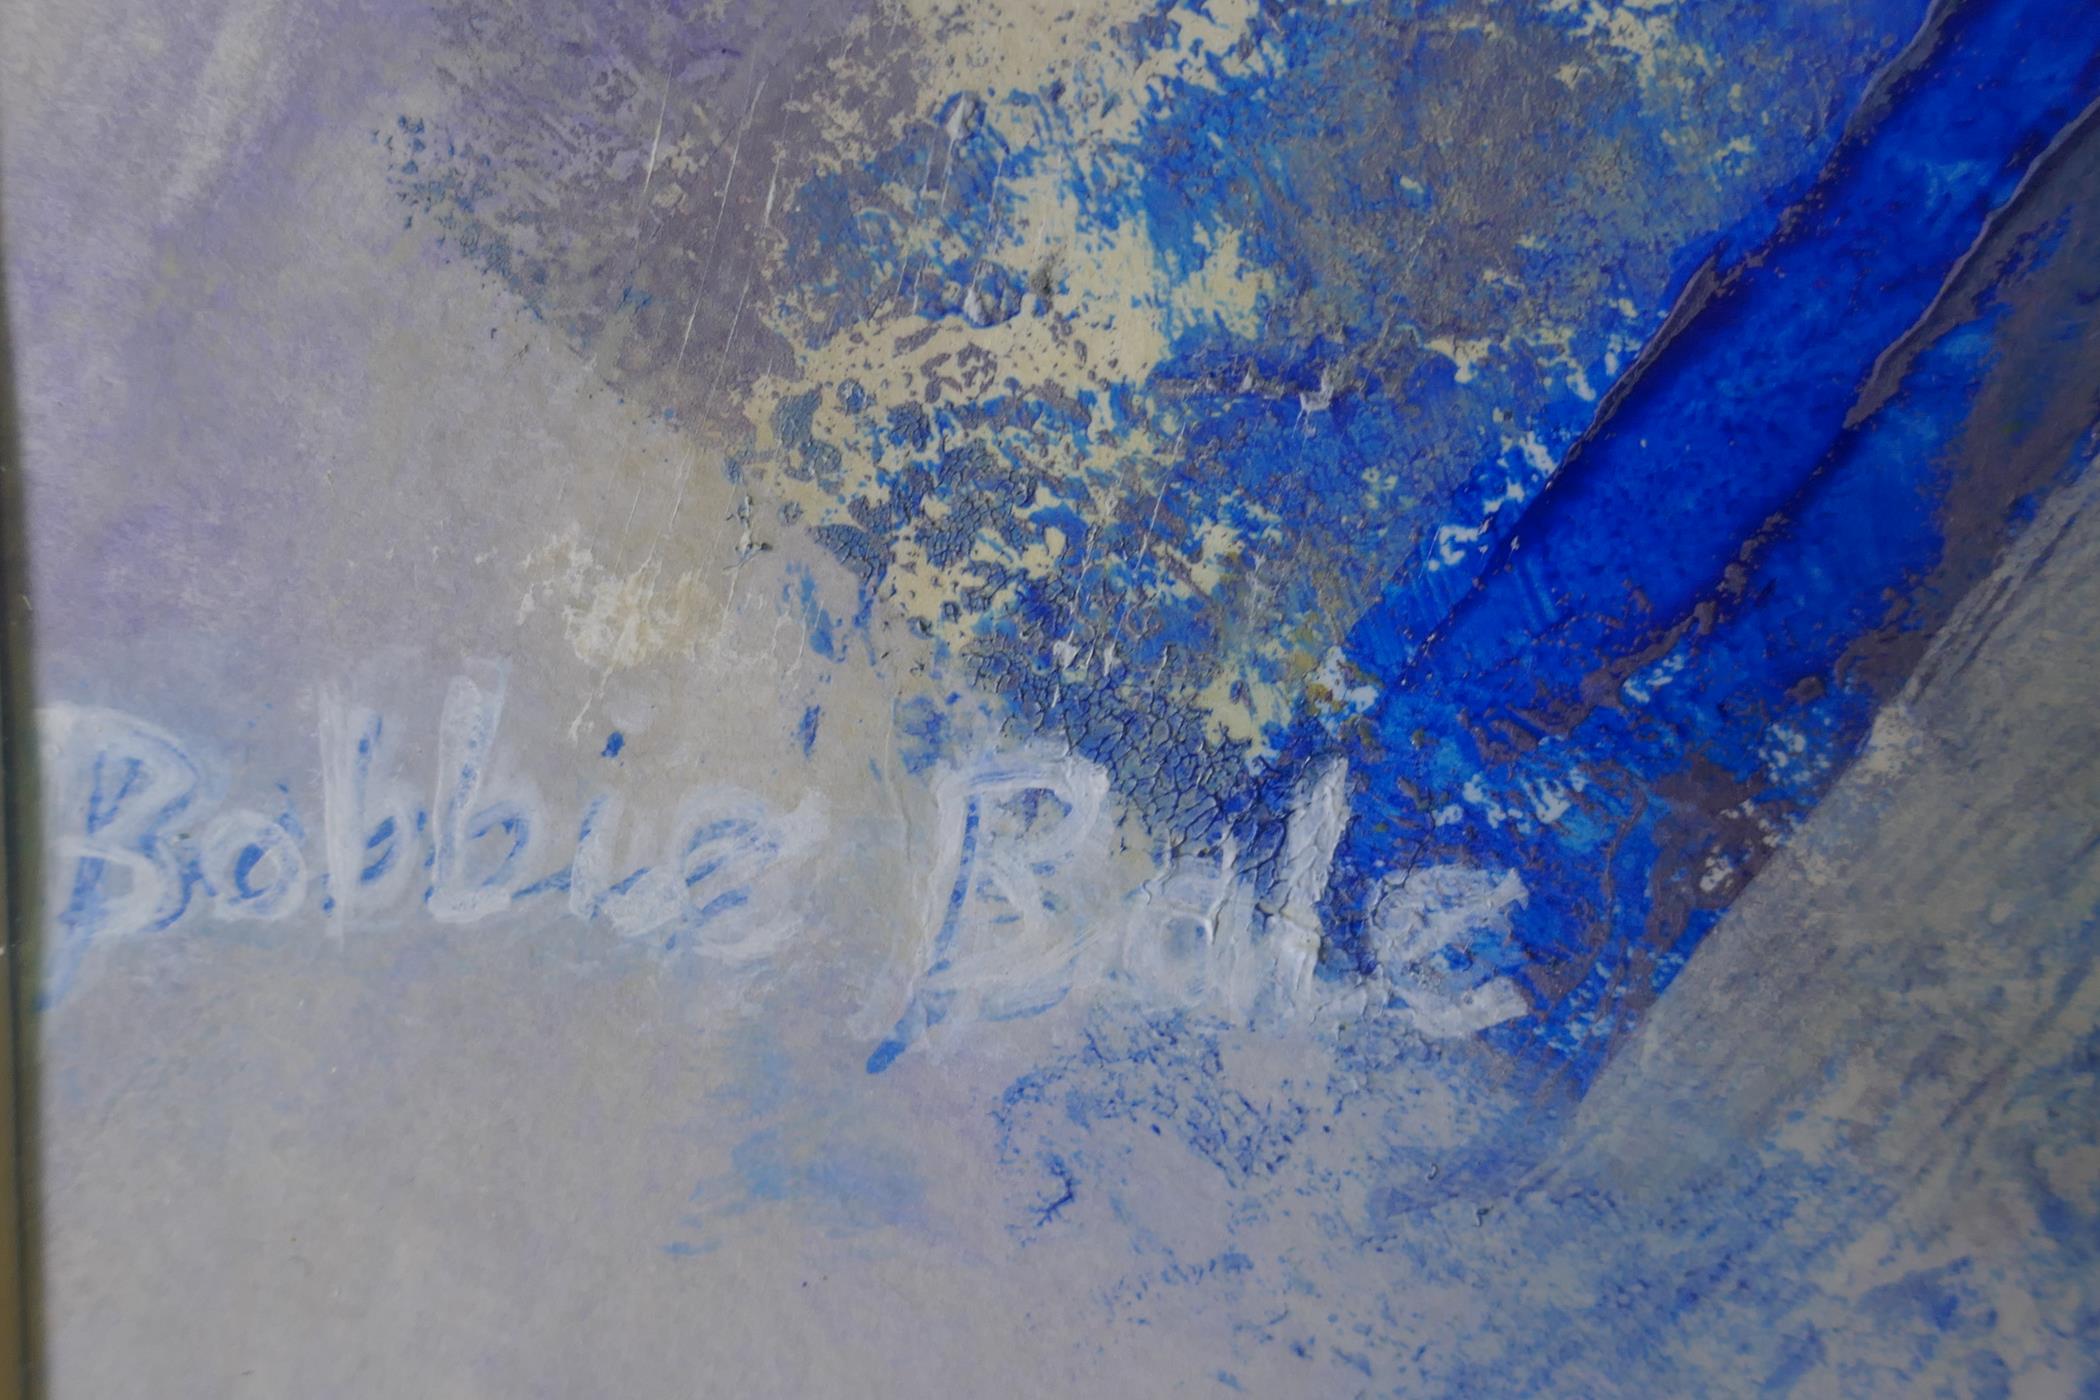 Bobbie Bale, abstract figural composition, signed, acrylic on paper, 34 x 57cm - Image 3 of 3